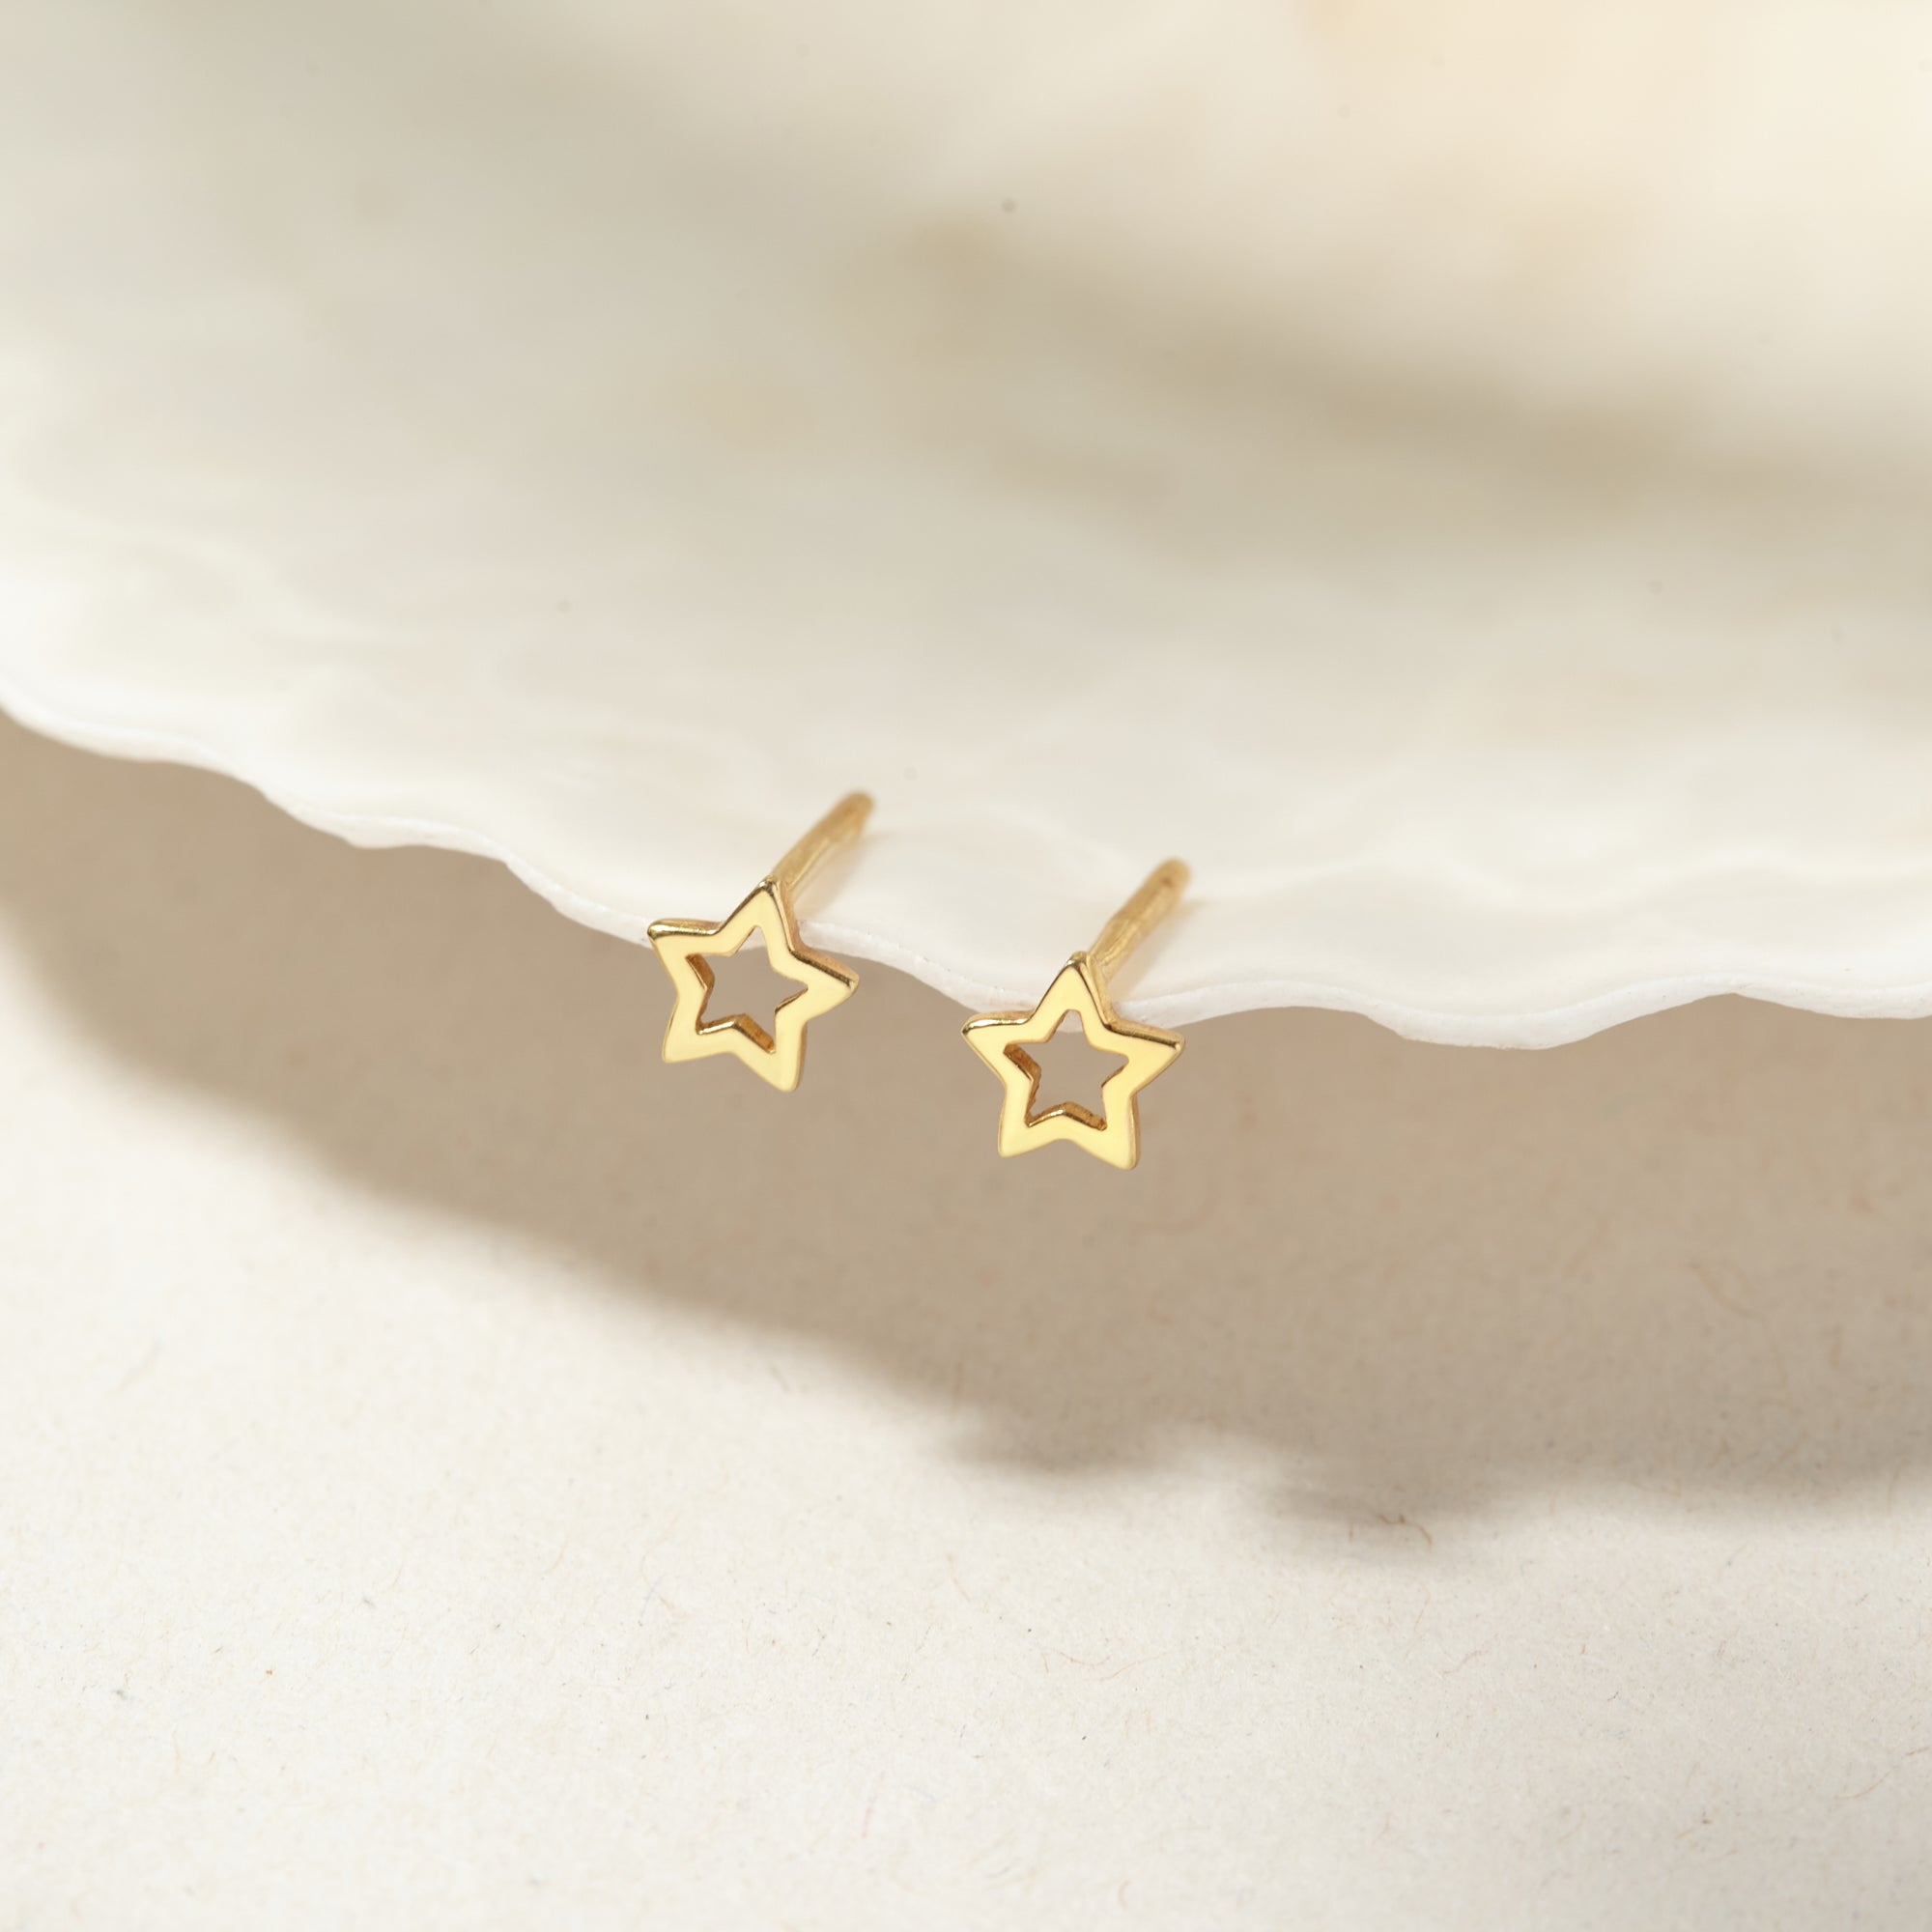 925 Sterling Silver Star-Shaped Earrings - Minimalist and Hypoallergenic Jewelry for Sensitive Skin Bijou Her